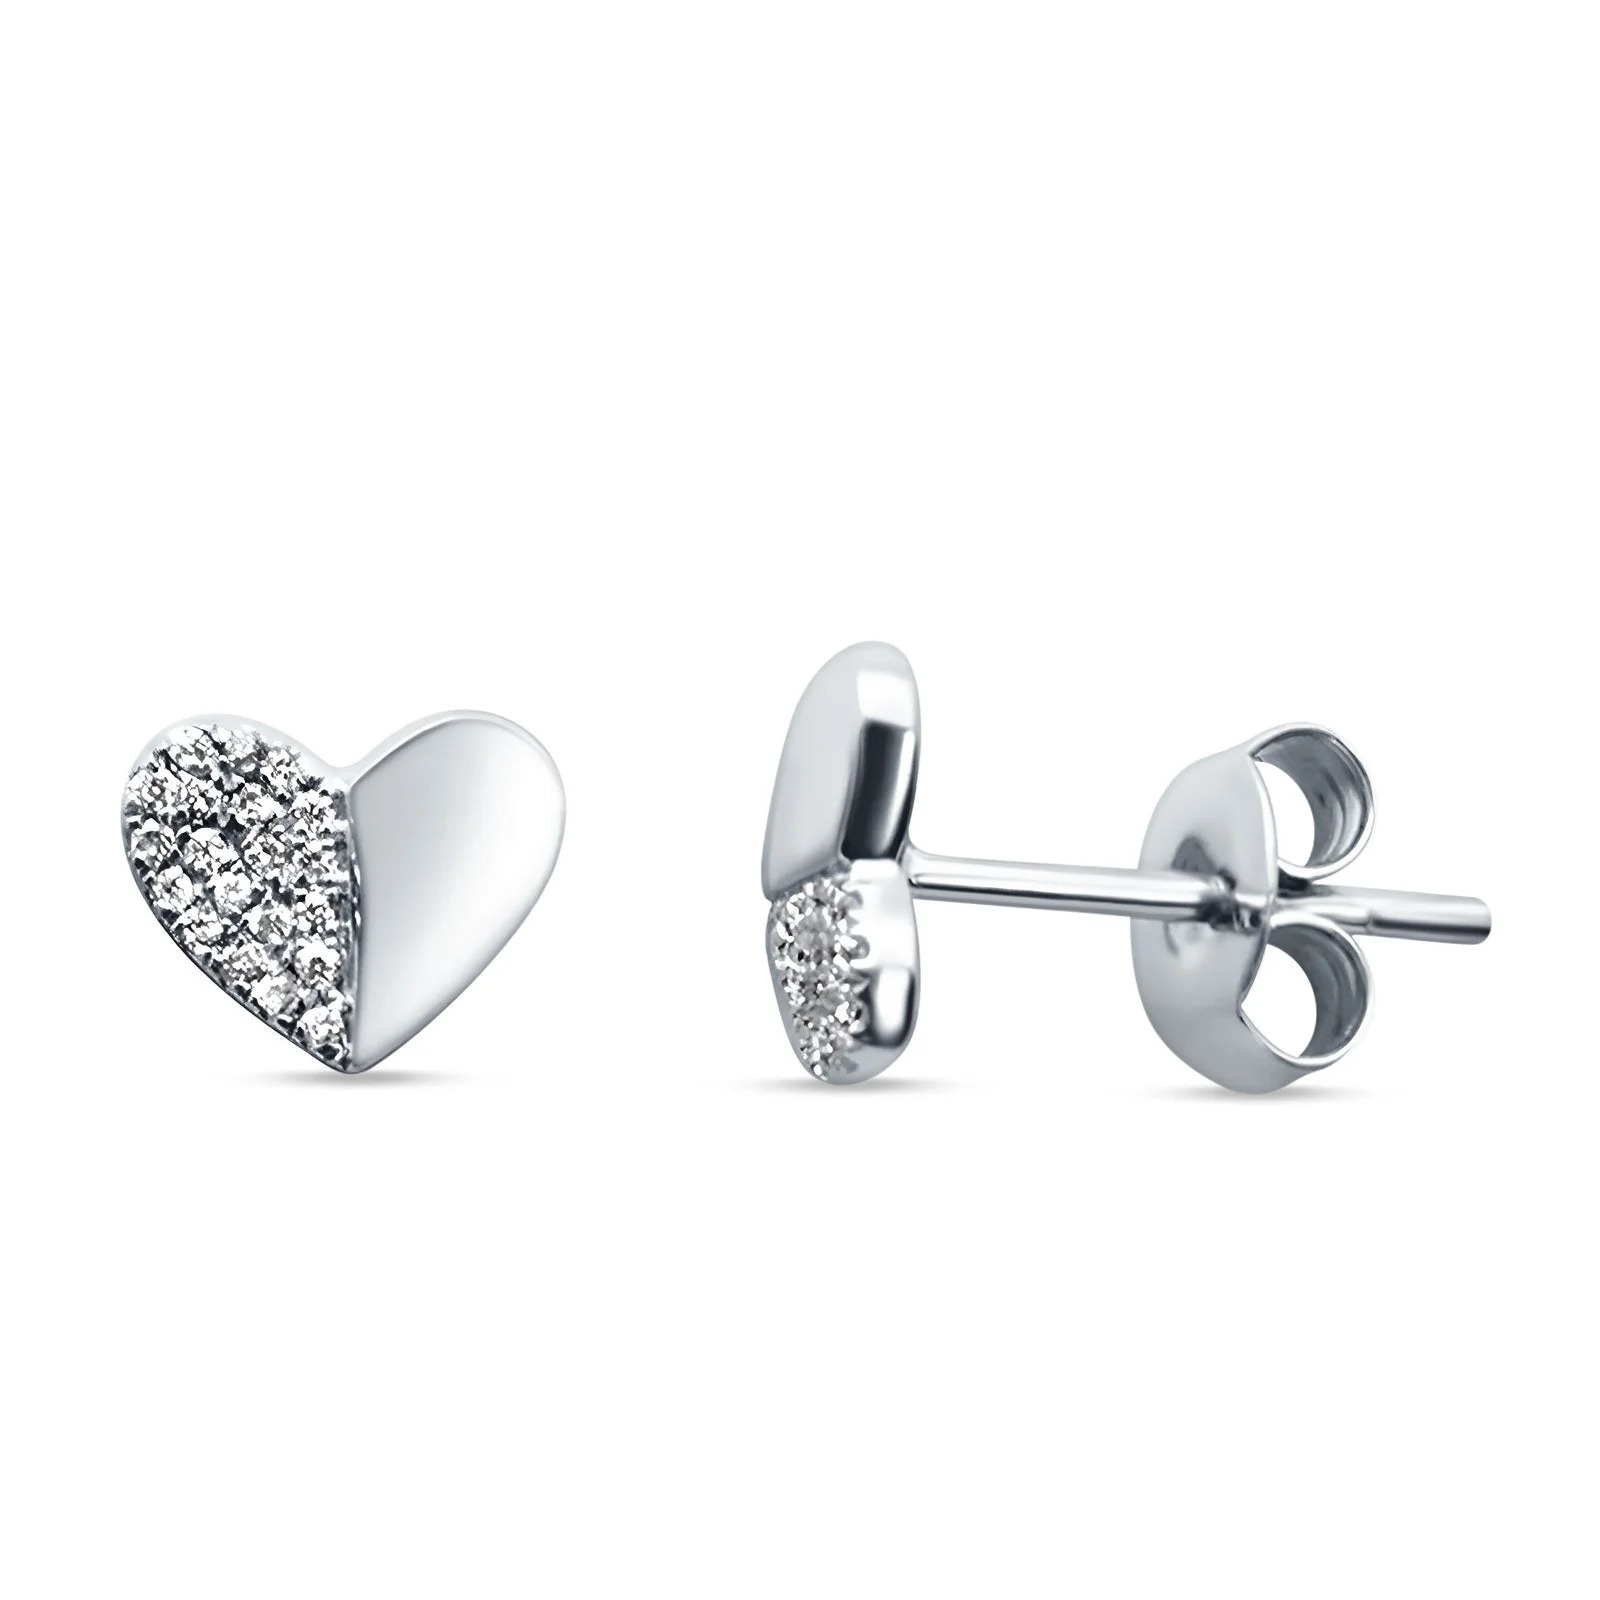 Primary image for 2.00 Ct Round Cut CZ White Diamond Heart Stud Earrings 14K White Gold Finish